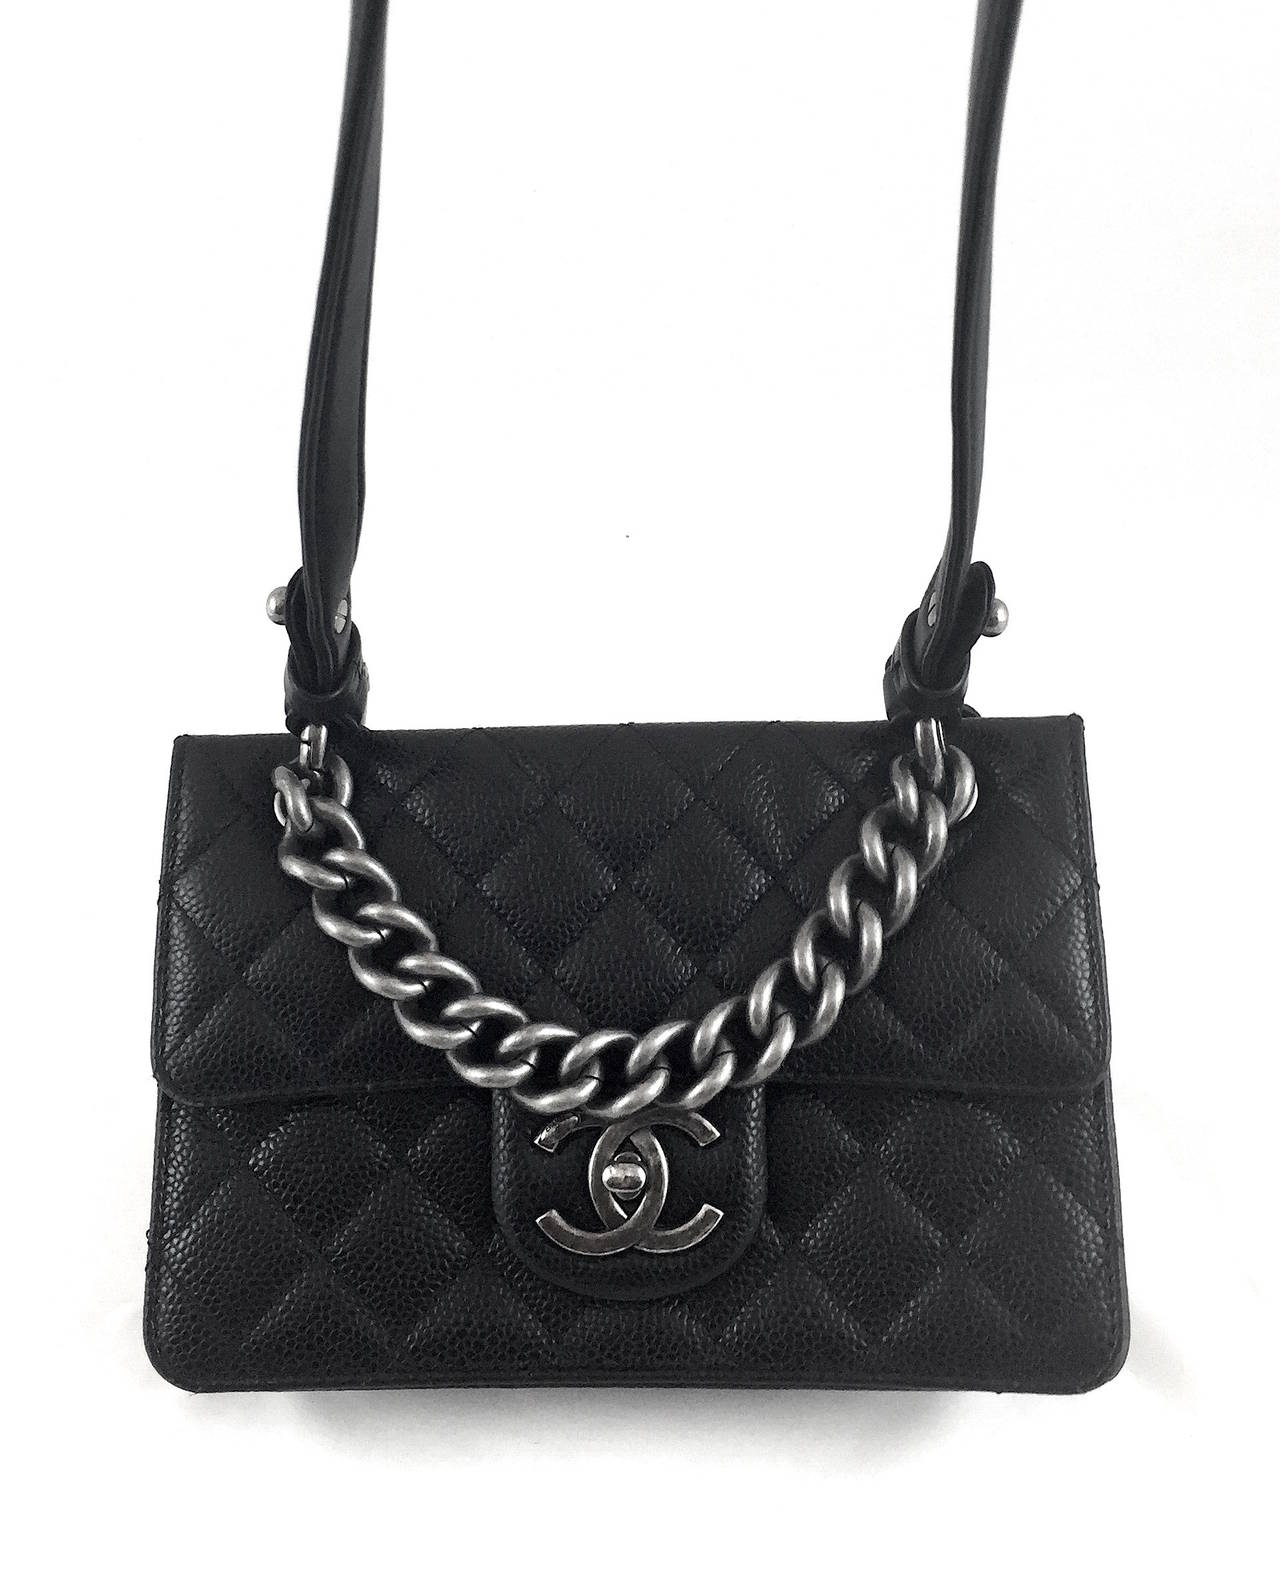 Chanel Black Caviar Retro Flap Shoulder Bag, 2014/15 Fall Winter Collection In Excellent Condition In Bethesda, MD